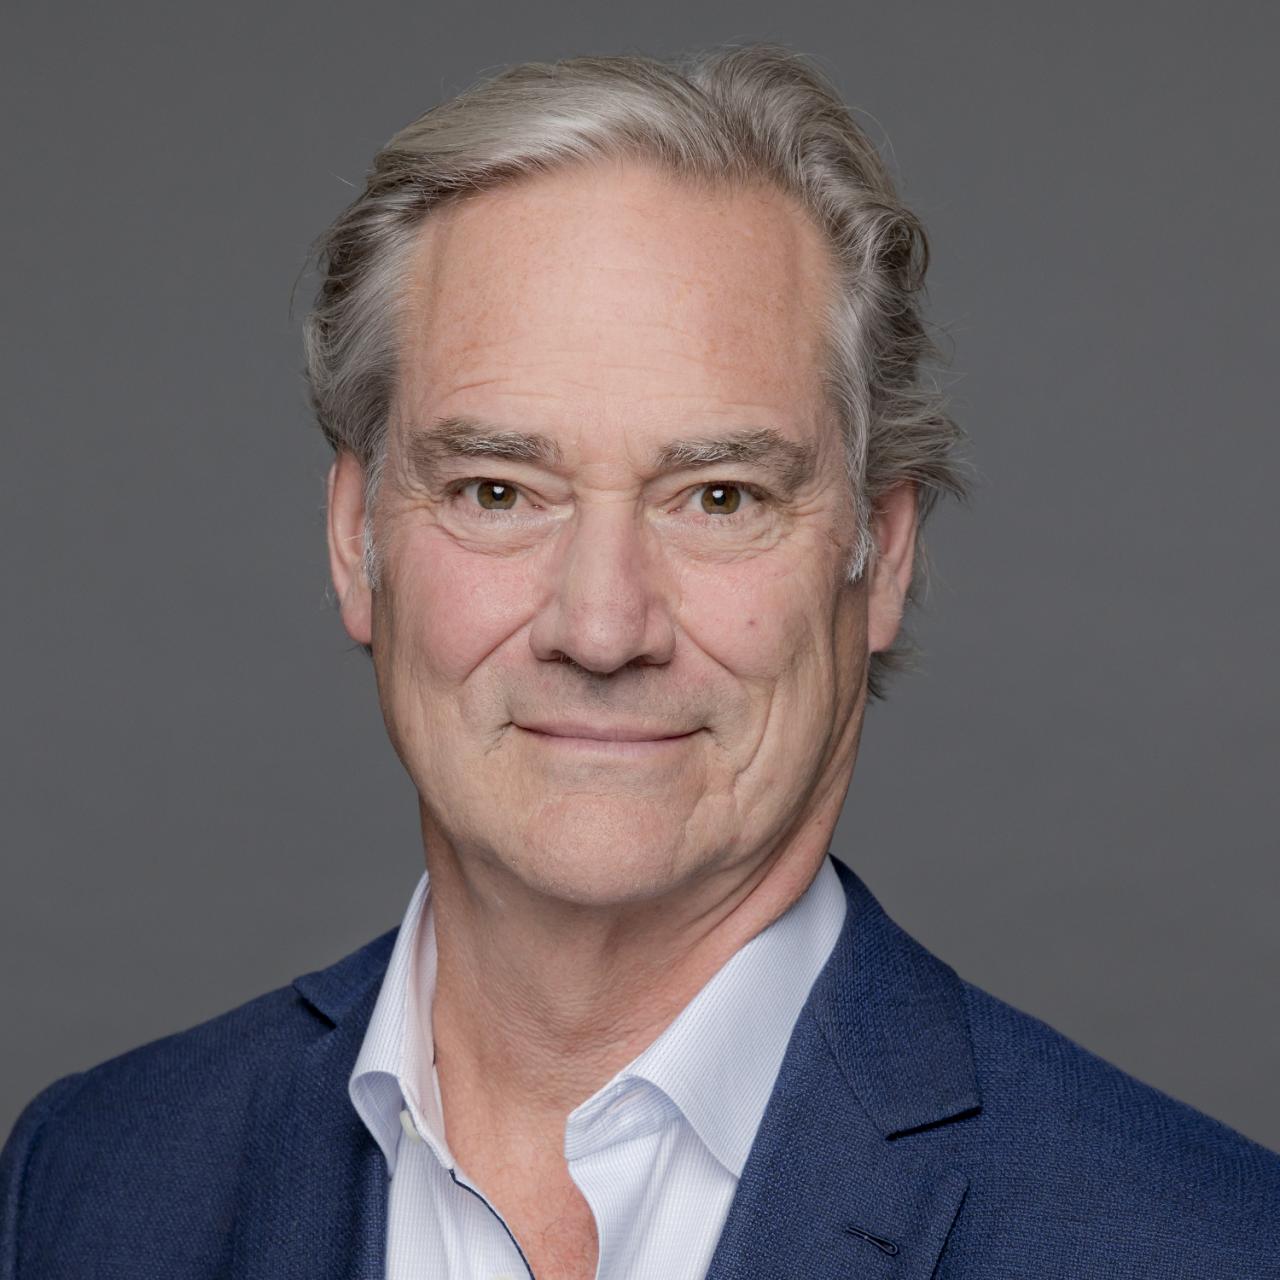 Michael McCain, President and CEO